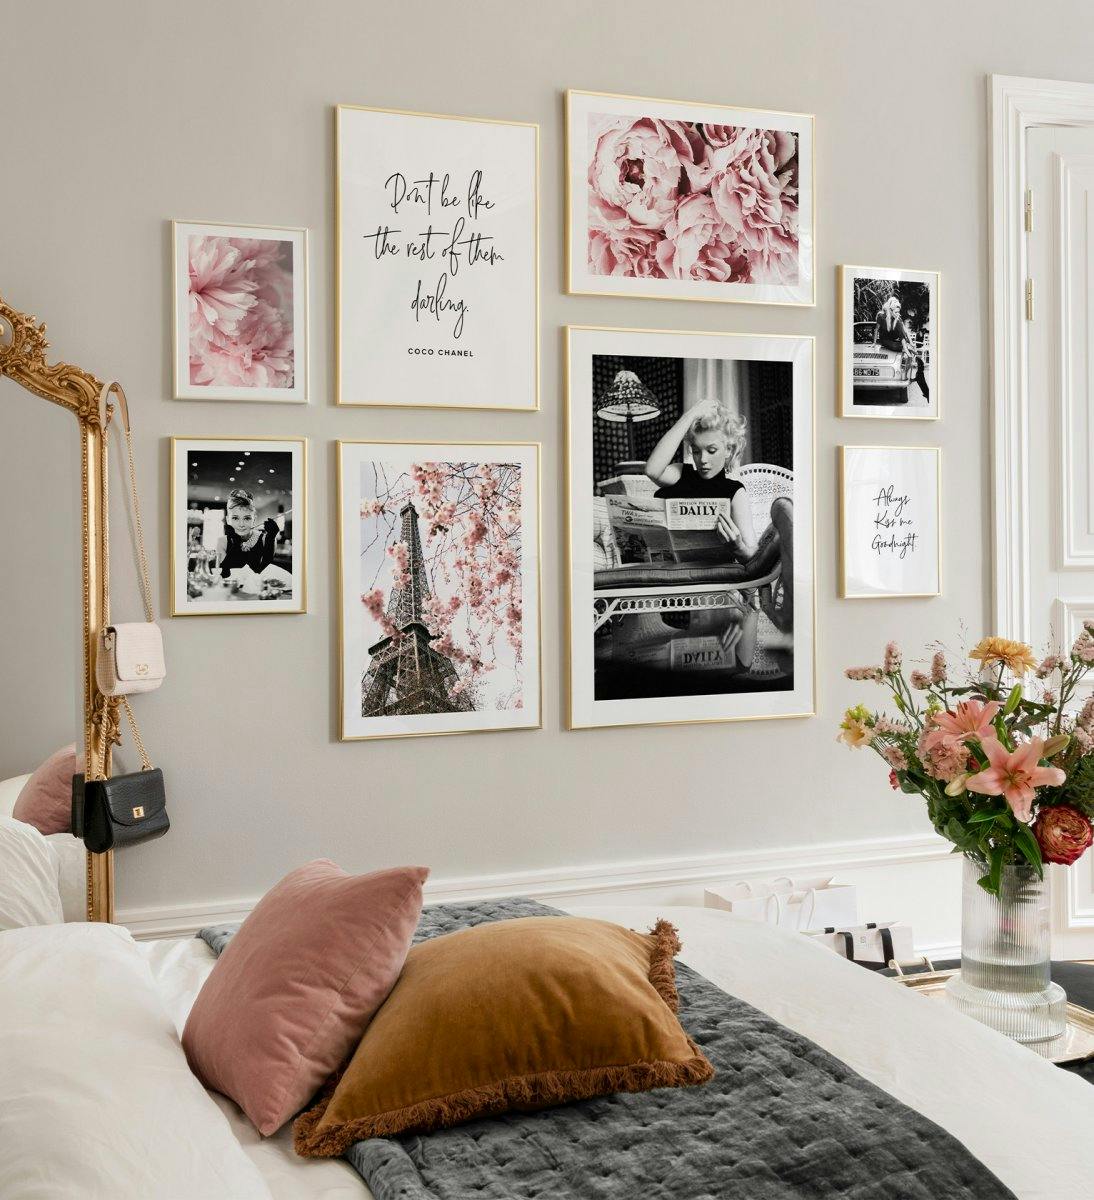 Fashionable gallery wall with pink flower posters, quote prints and celebrities posters with golden frames for living room